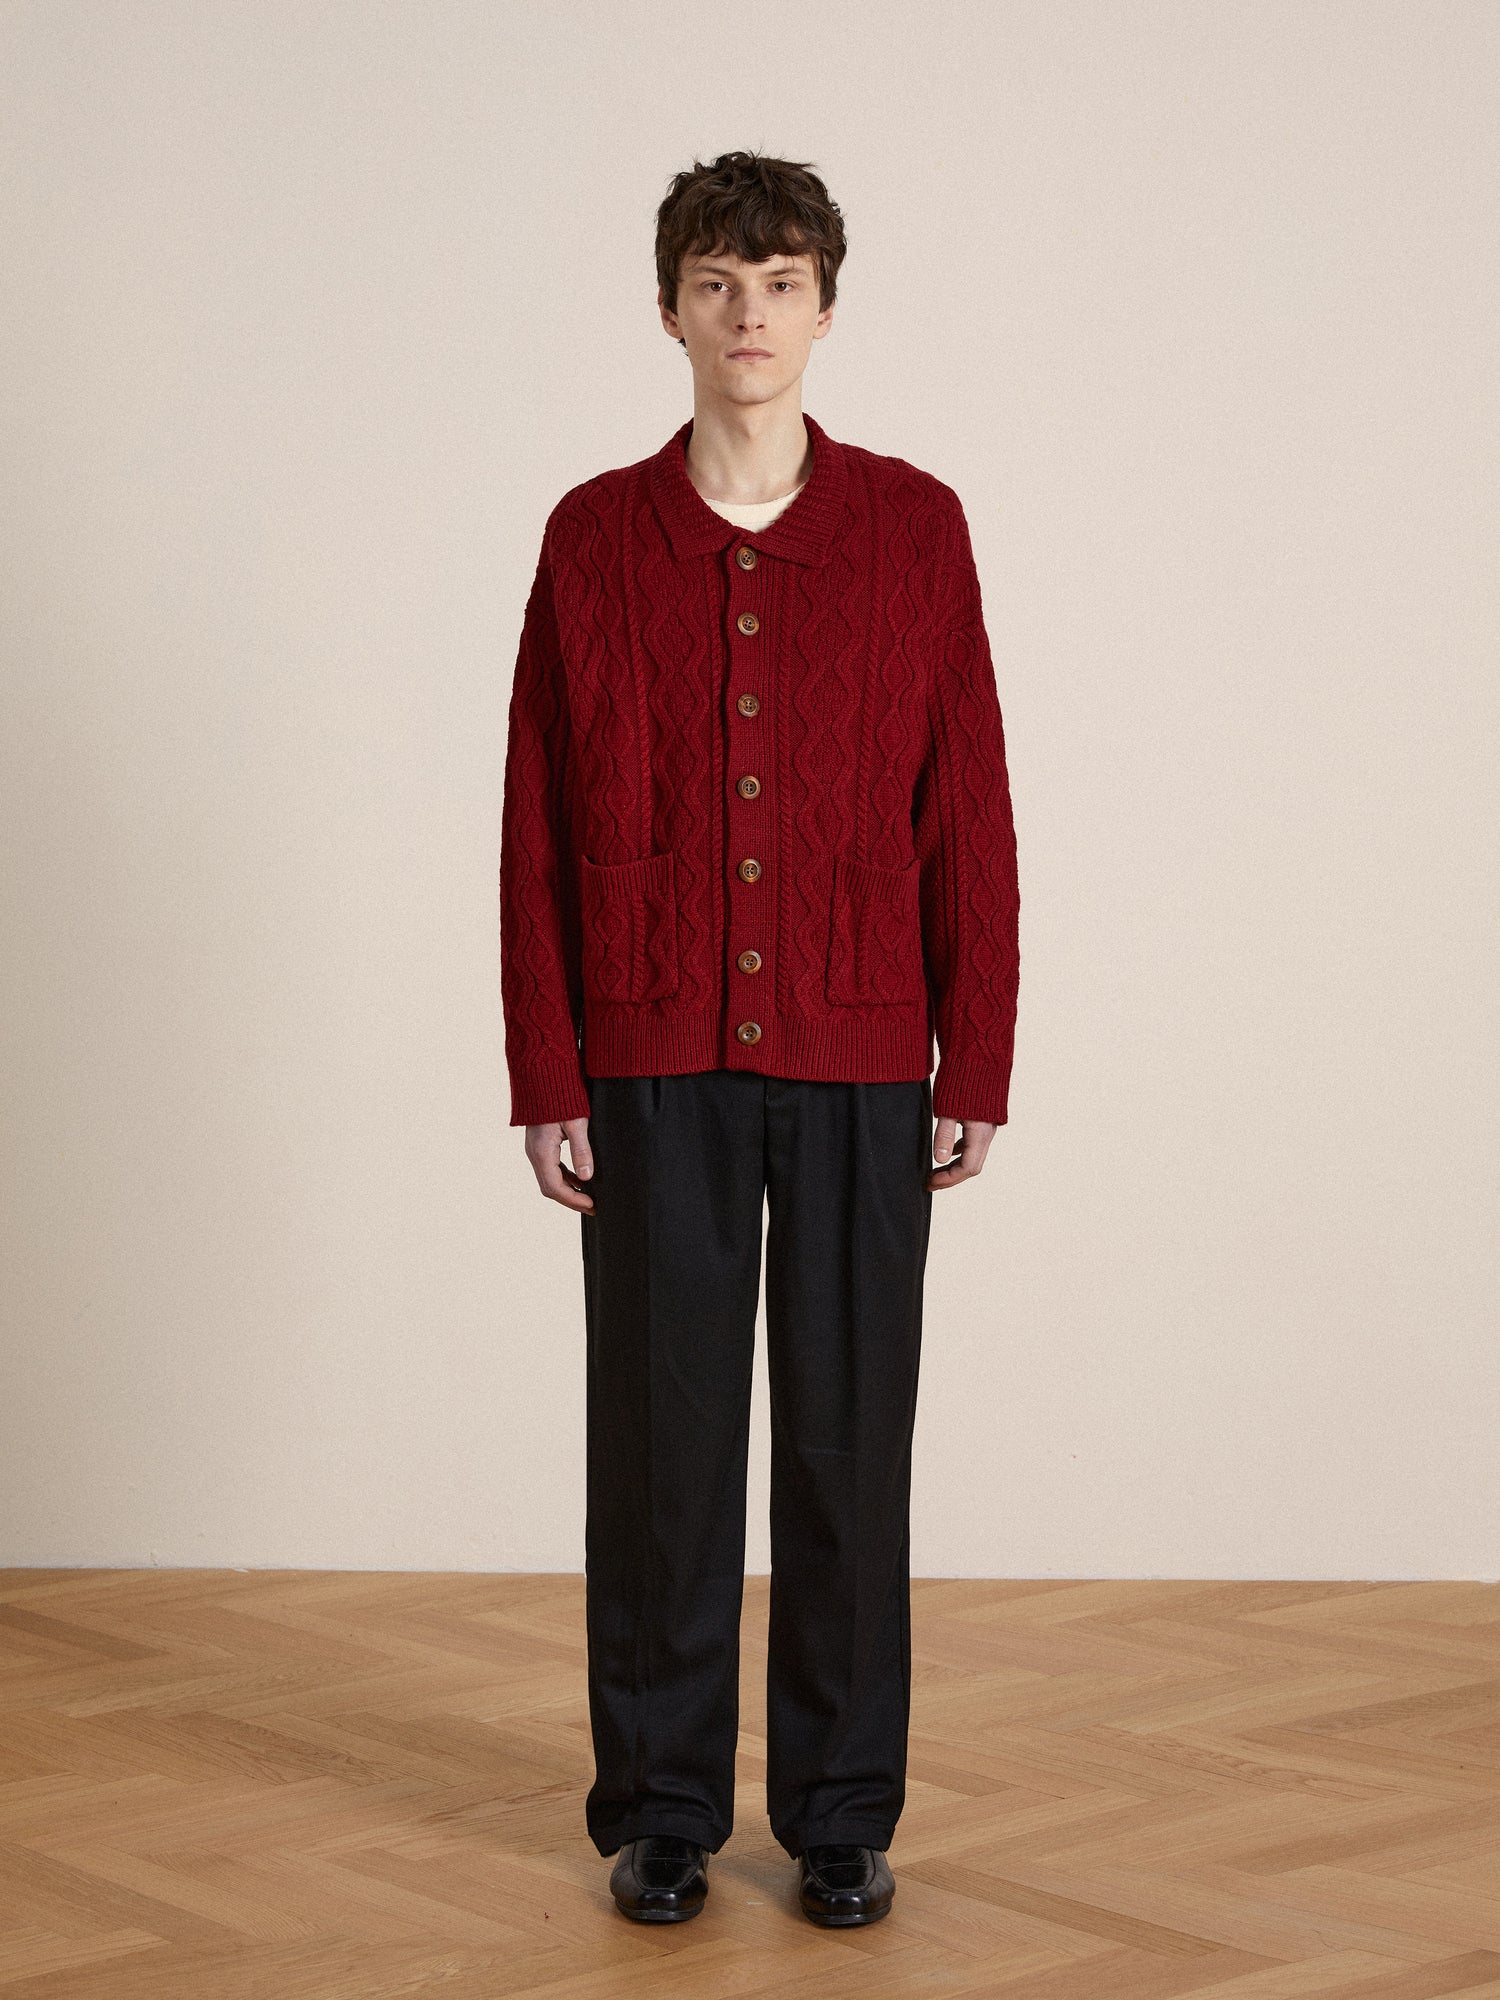 A person standing in a room wearing a Found Parsidan Cable Knit Cardigan.